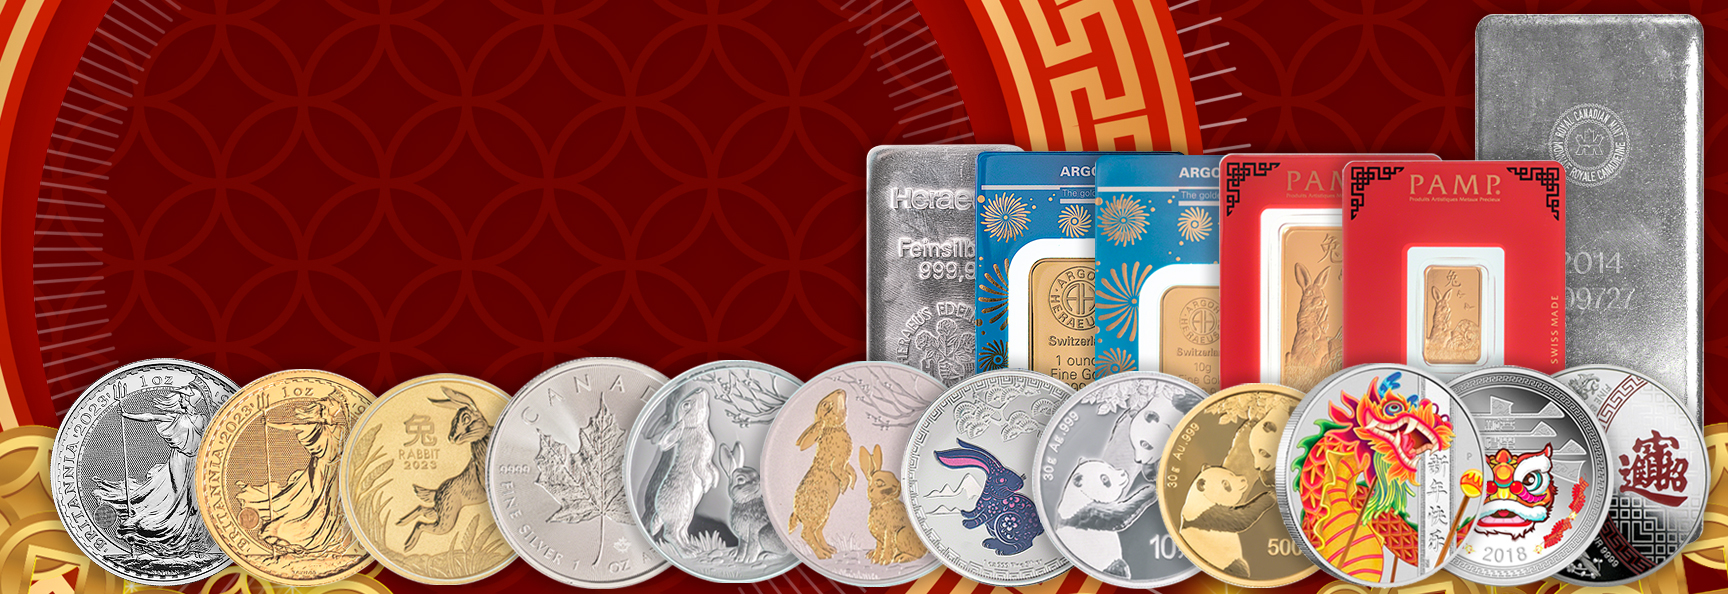 Shop Your Lunar New Year Gifts with BullionStar!